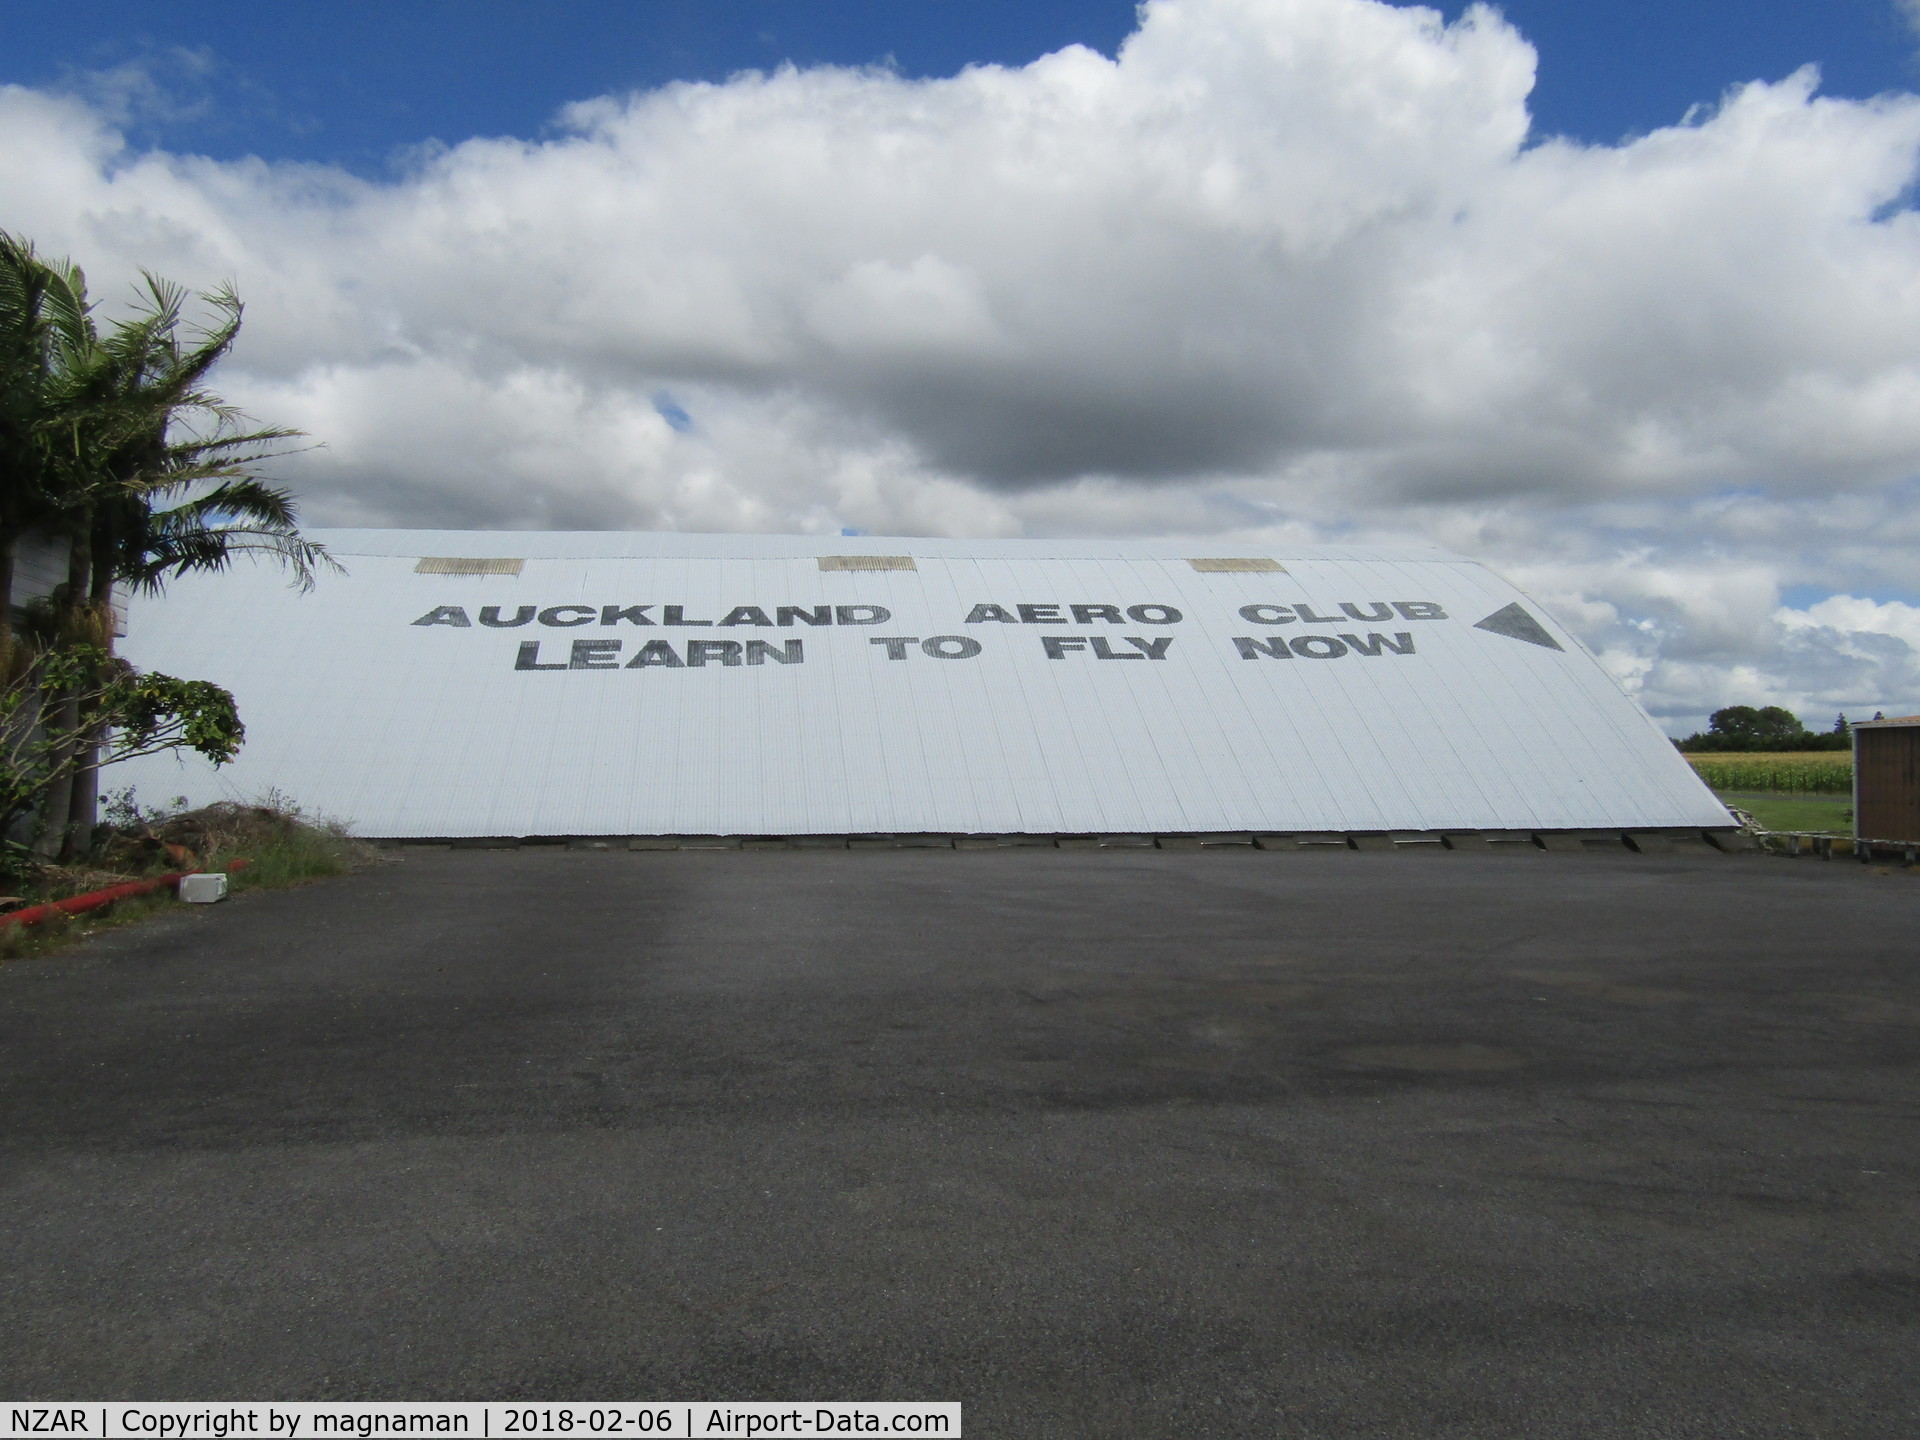 Ardmore Airport, Auckland New Zealand (NZAR) - old blister hangar - no flying club inside that anymore.